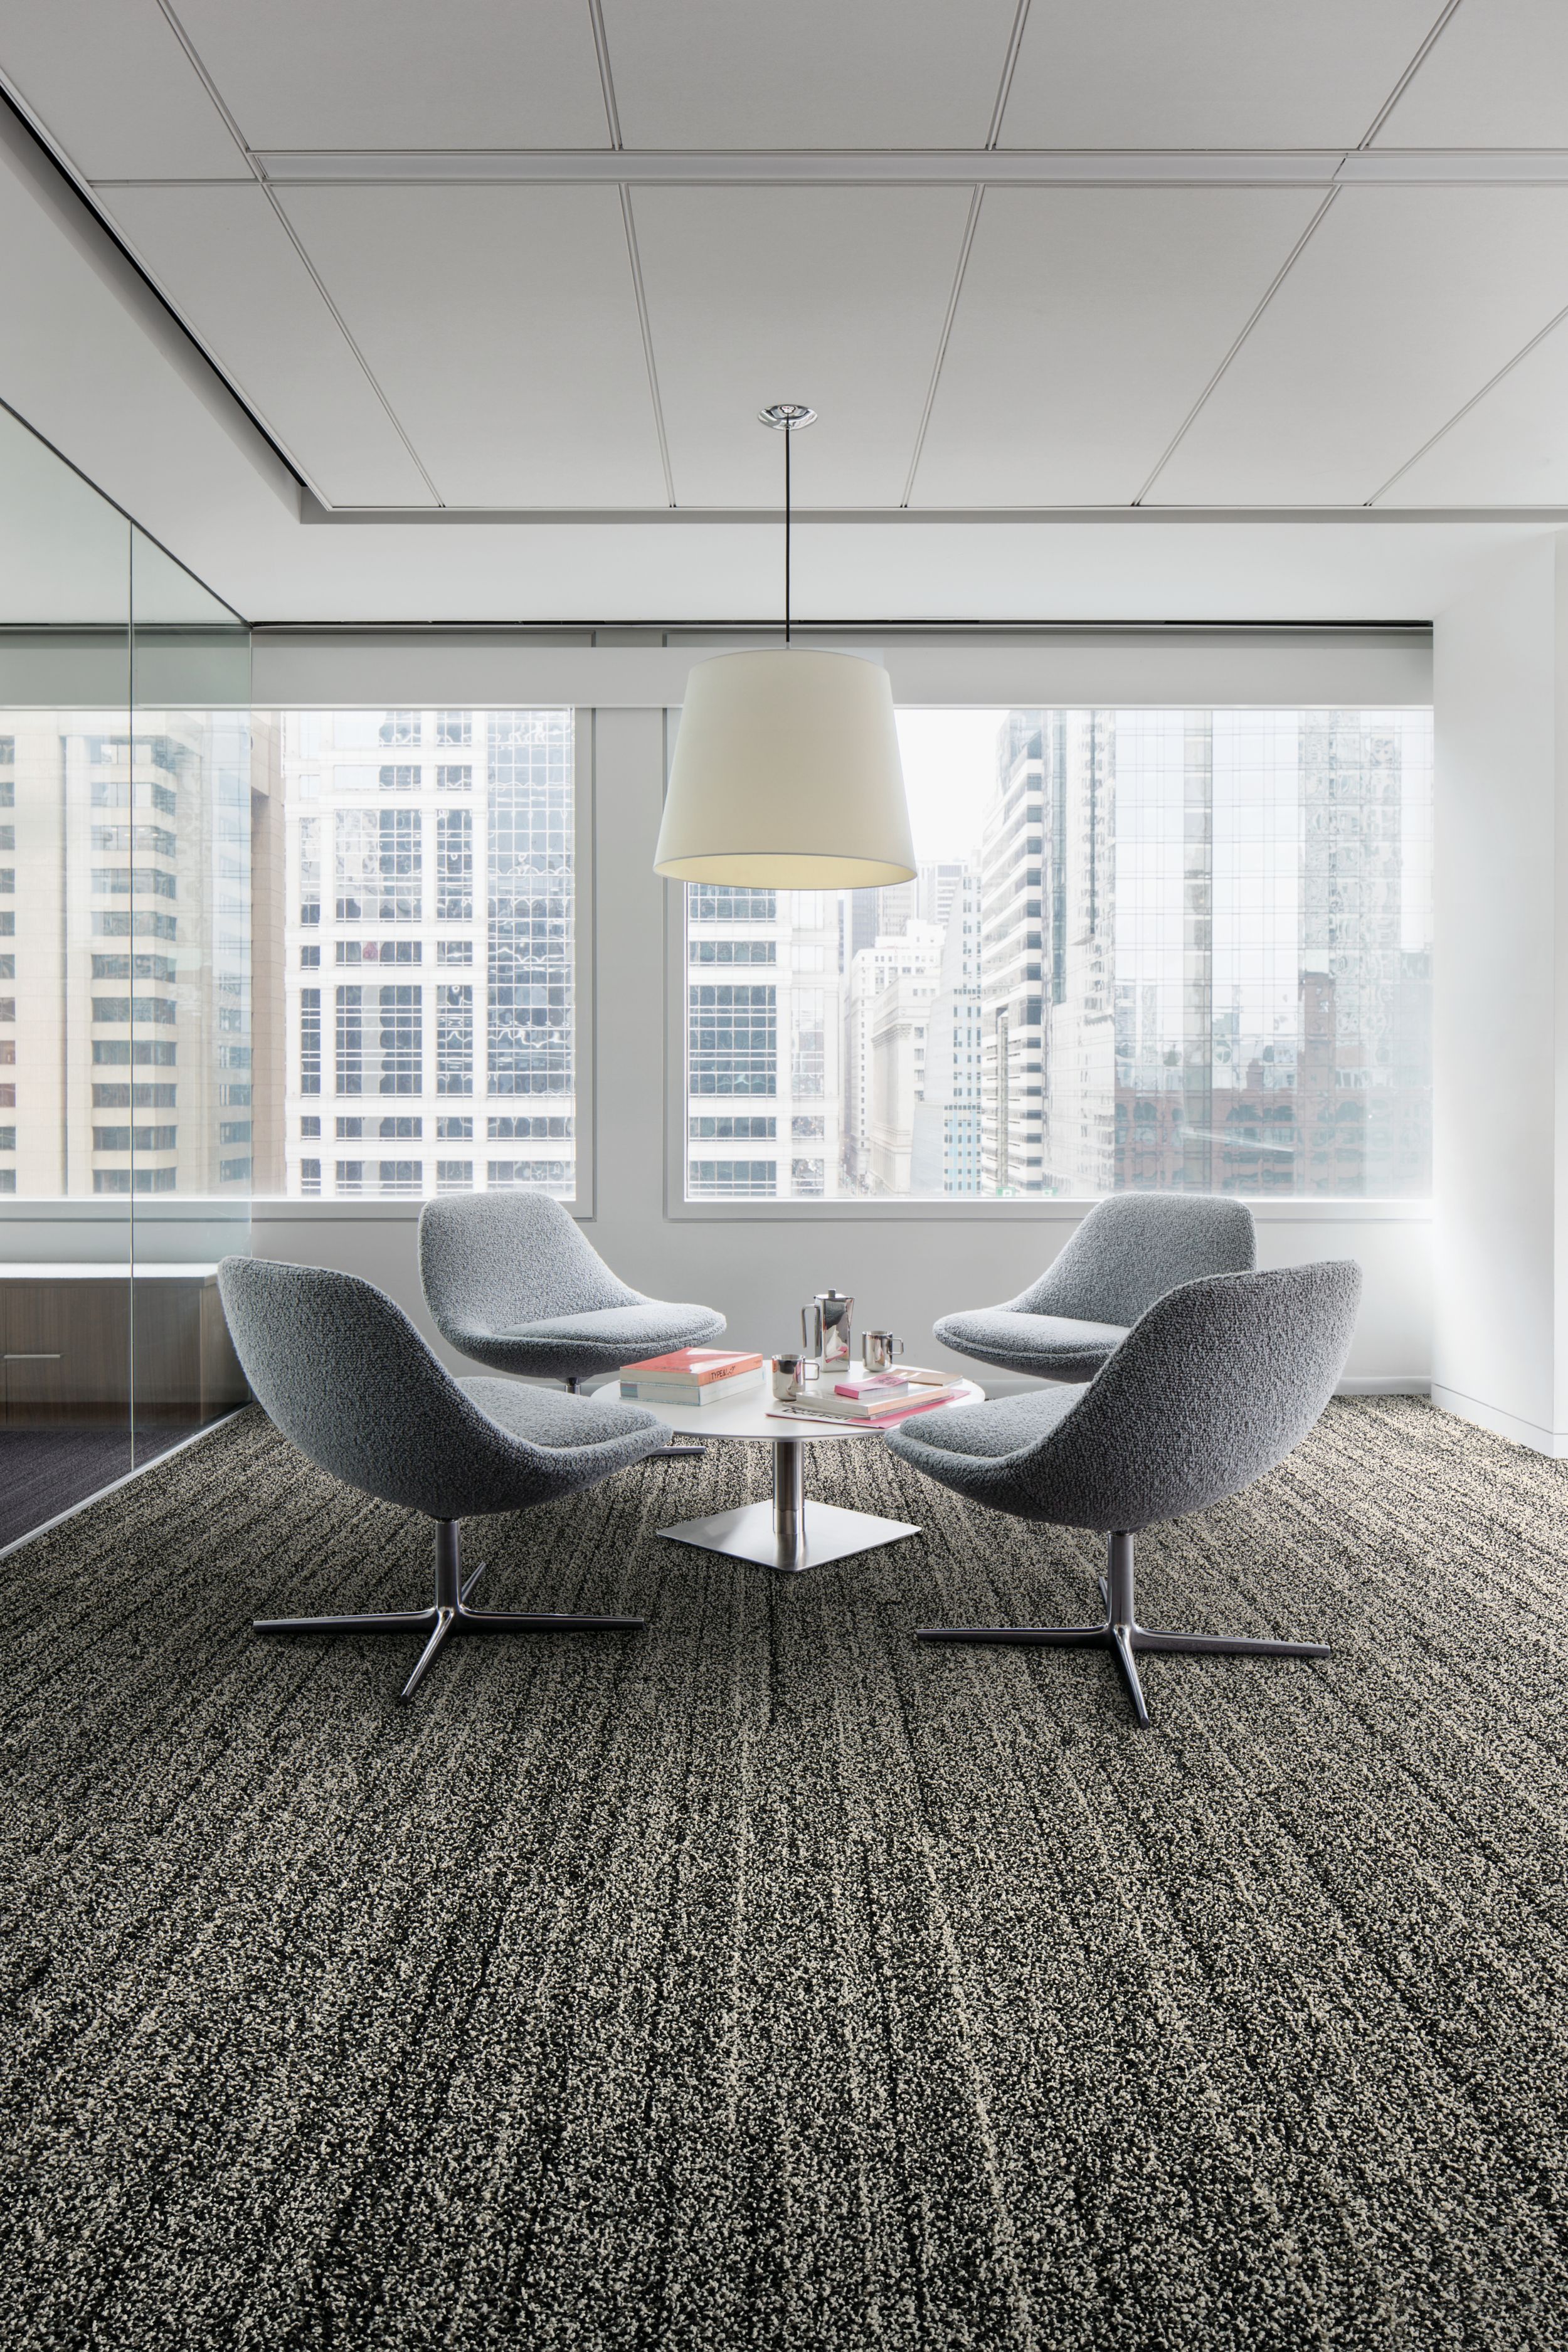 Interface Overedge plank carpet tile with fabric chairs around round table Bildnummer 2